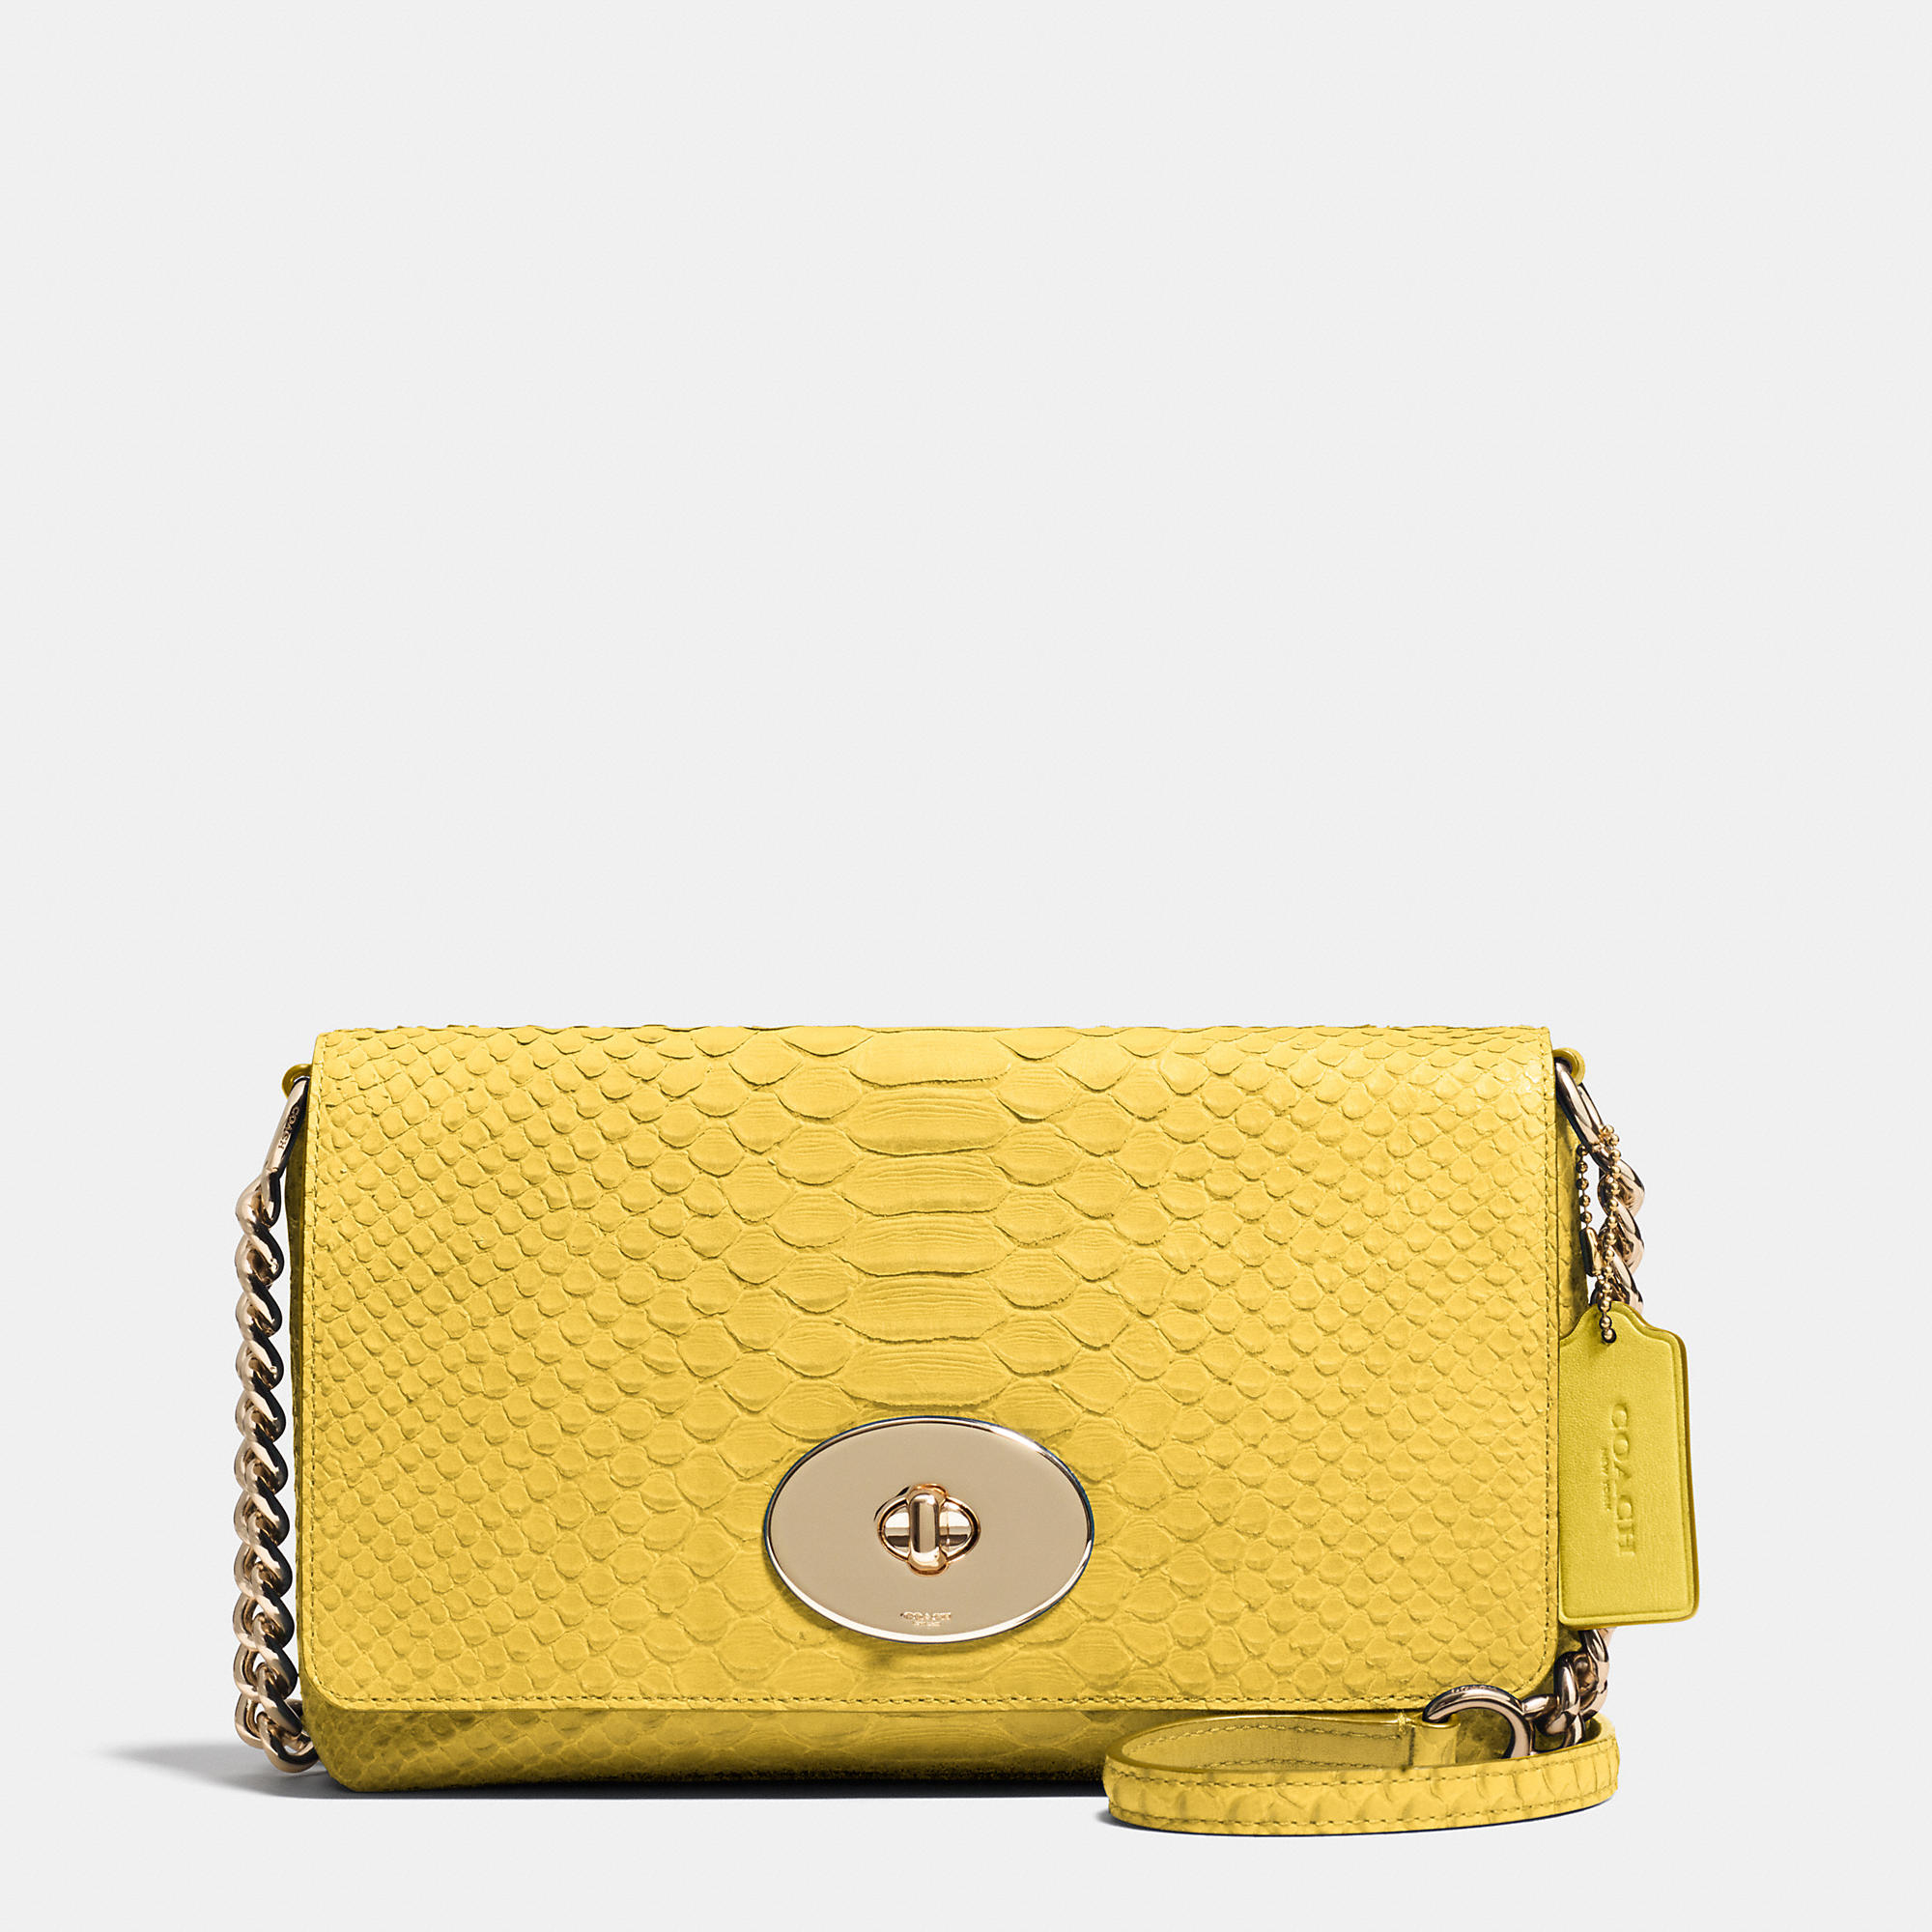 Lyst - Coach Crosstown Crossbody In Embossed Python Leather in Yellow